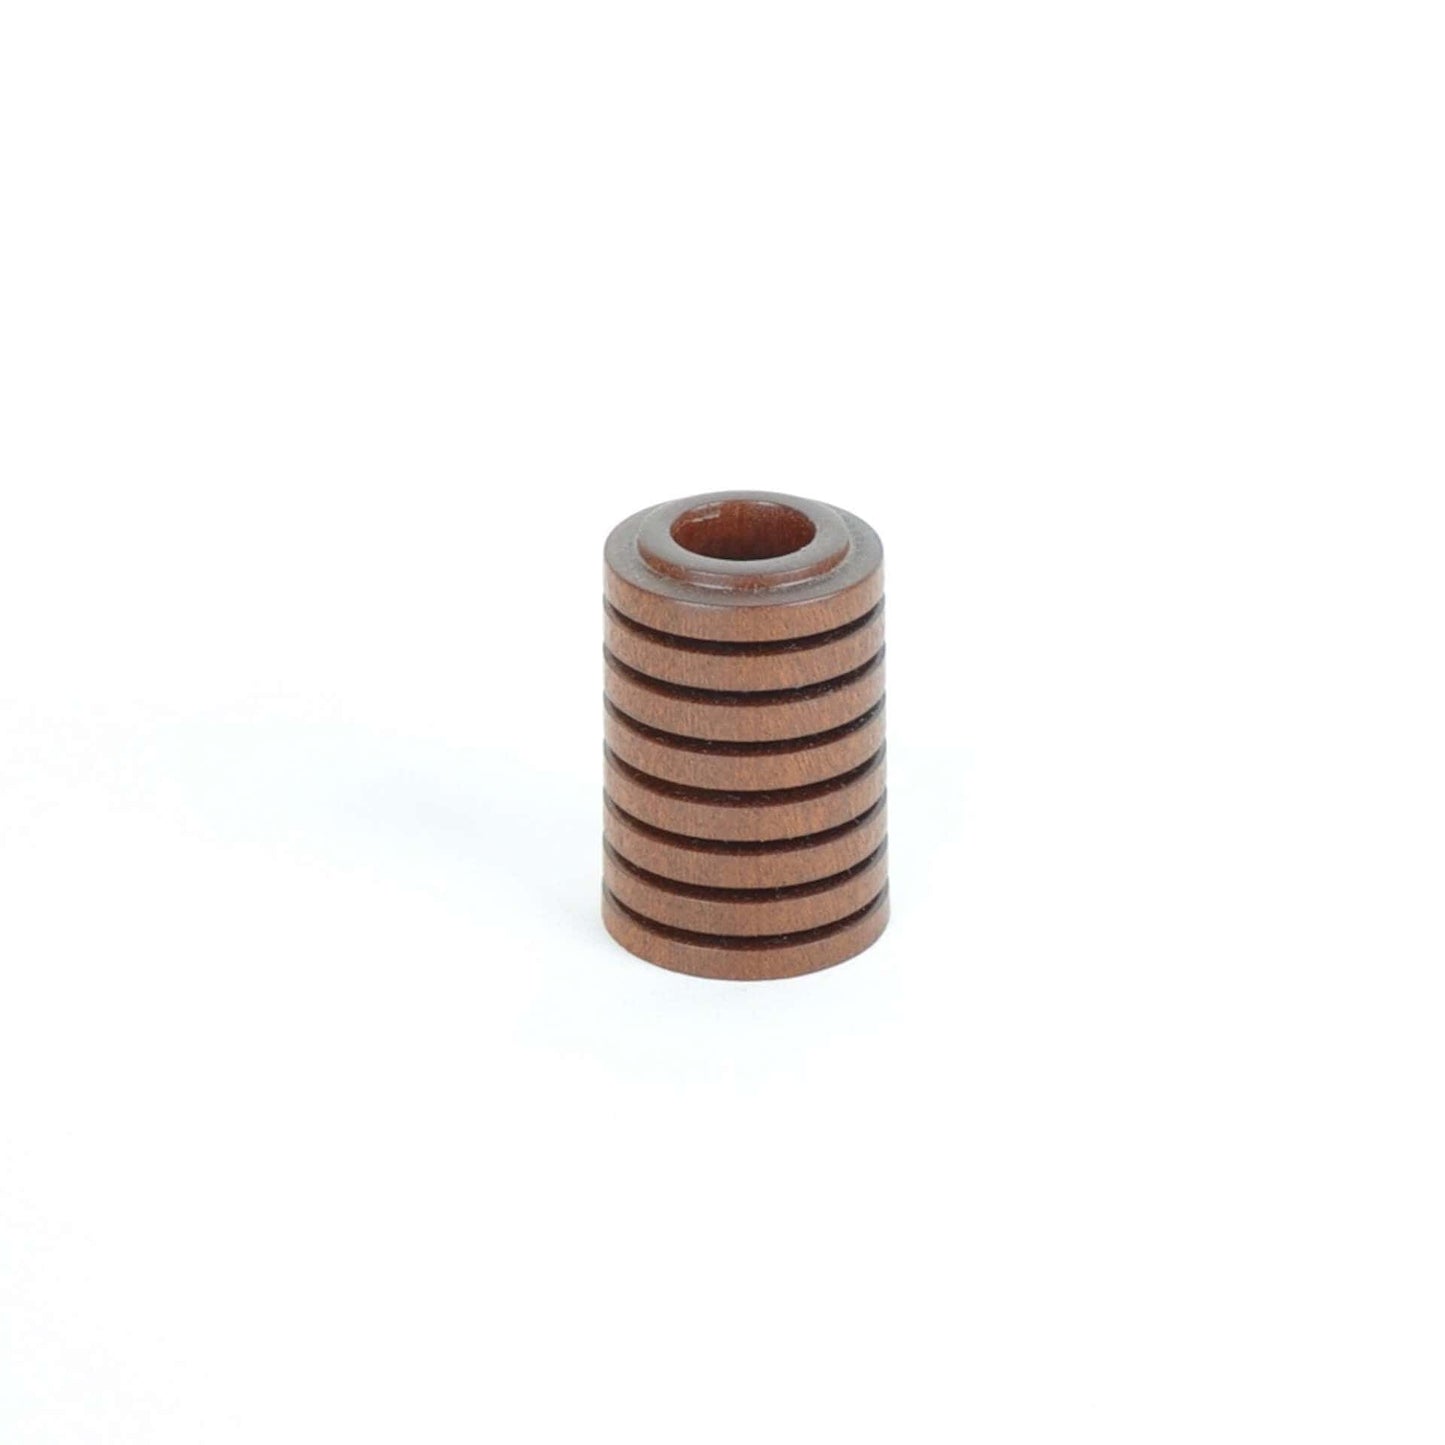 Something From The Turnery Candle Holder Short c Wooden Candle Holders - Sapele